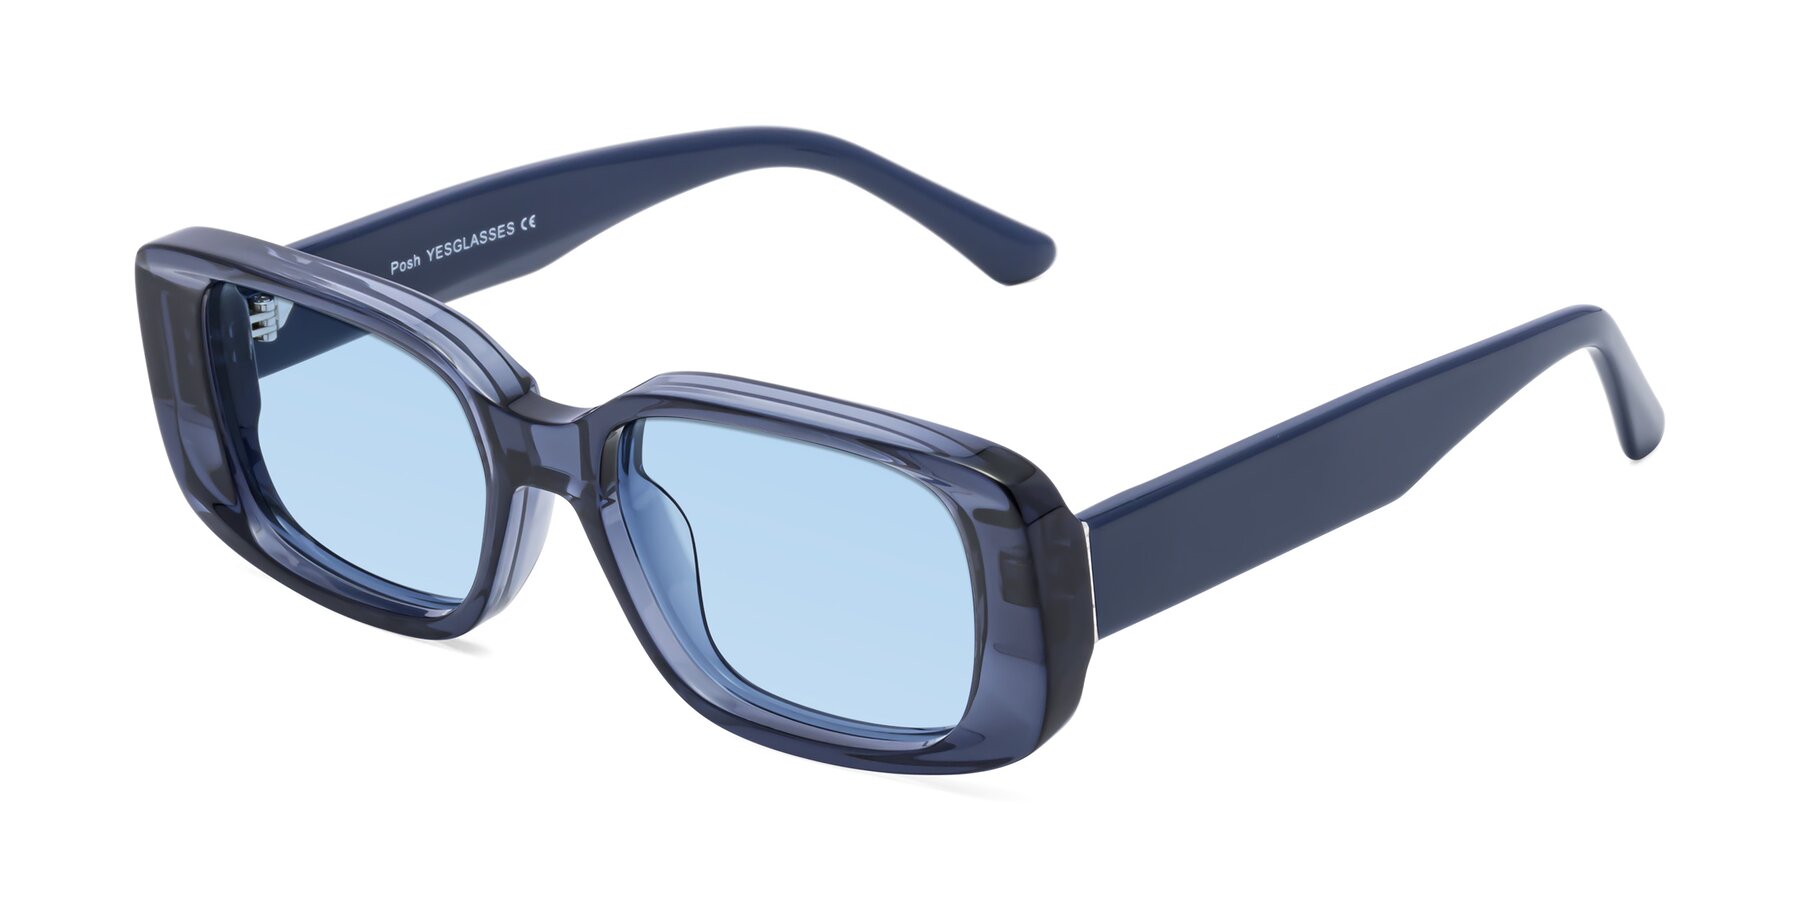 Angle of Posh in Translucent Blue with Light Blue Tinted Lenses